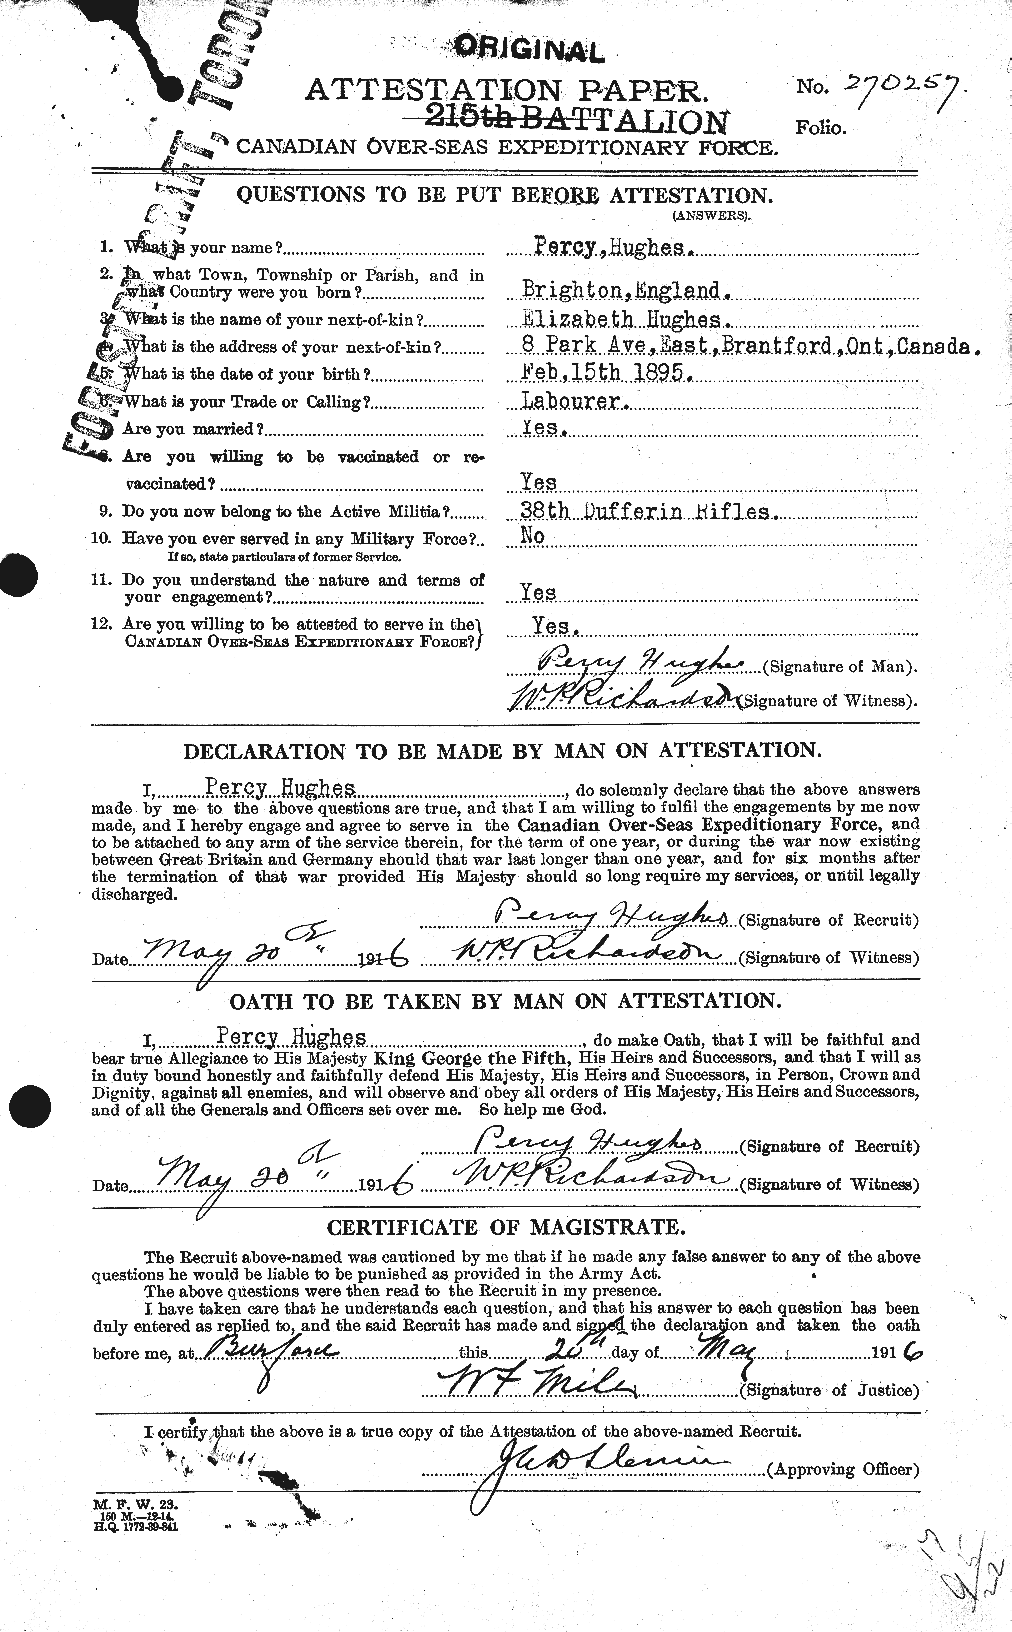 Personnel Records of the First World War - CEF 404152a